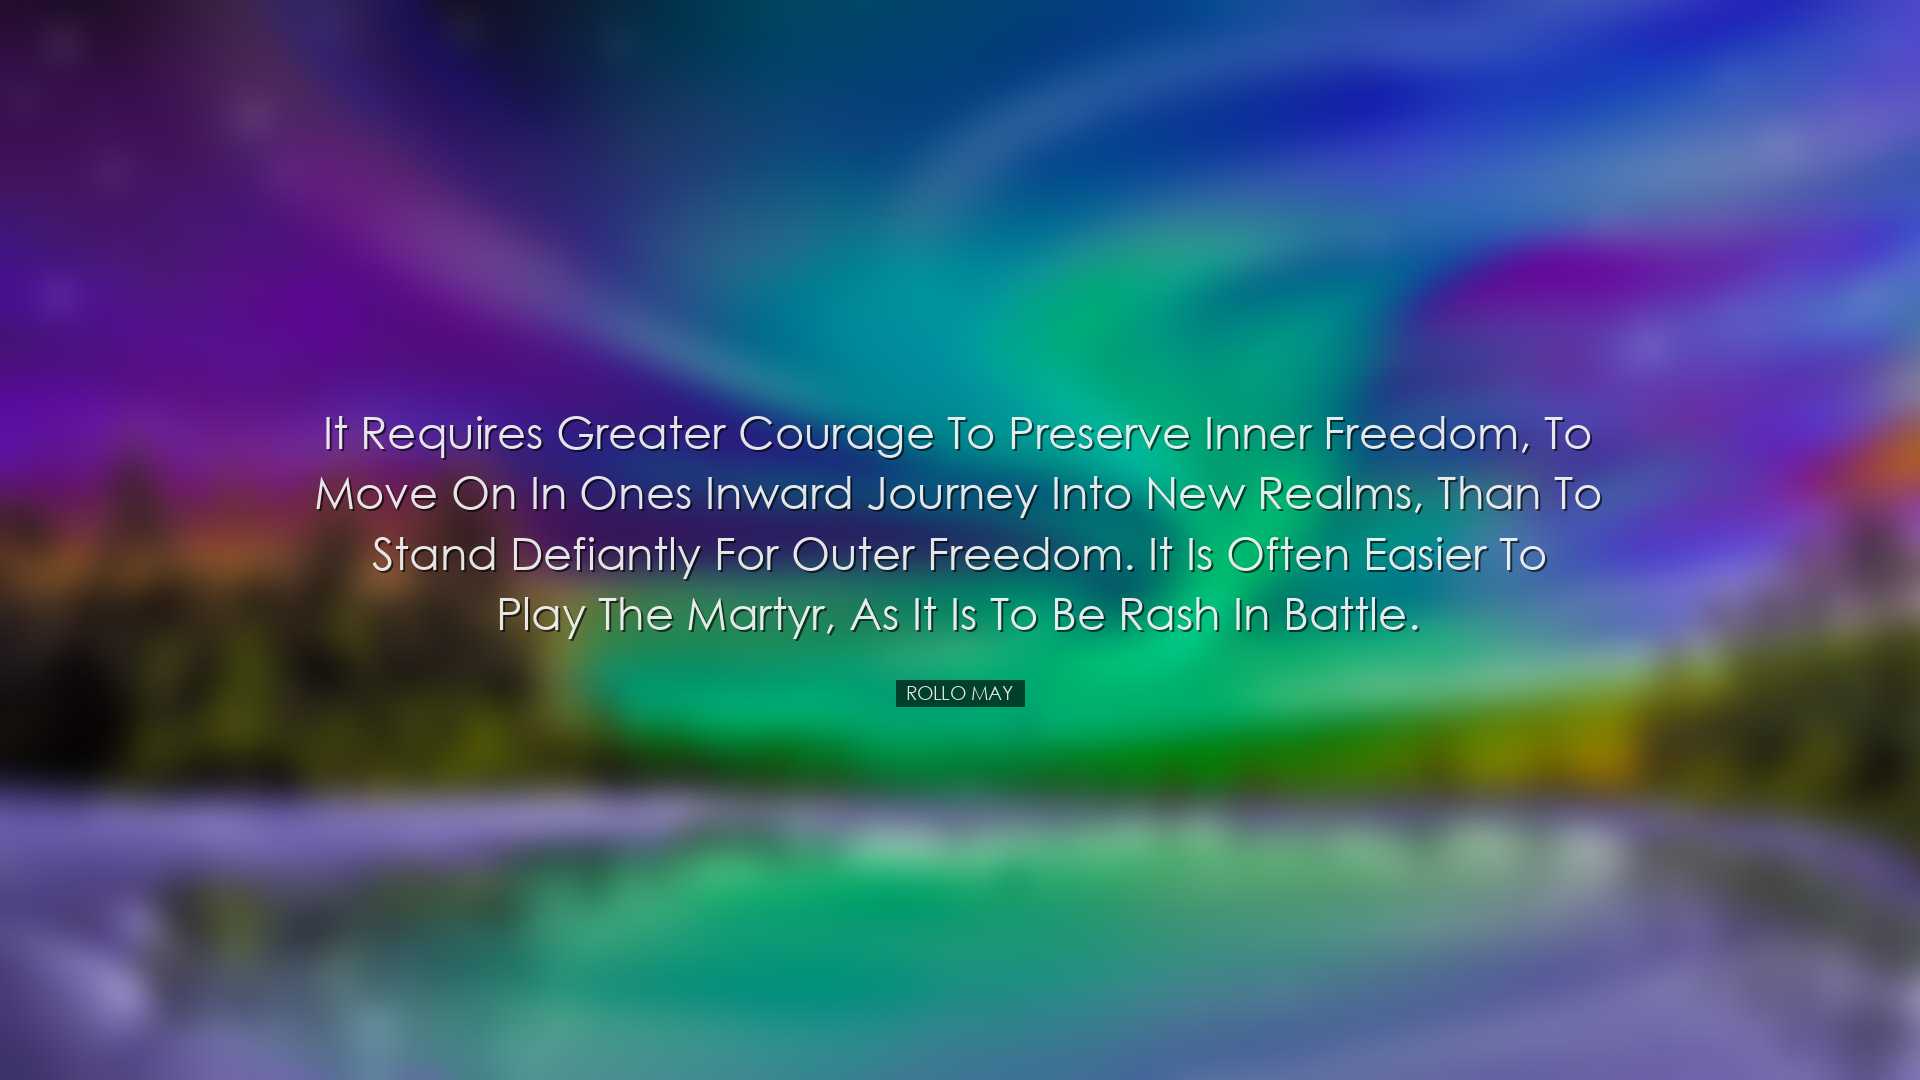 It requires greater courage to preserve inner freedom, to move on